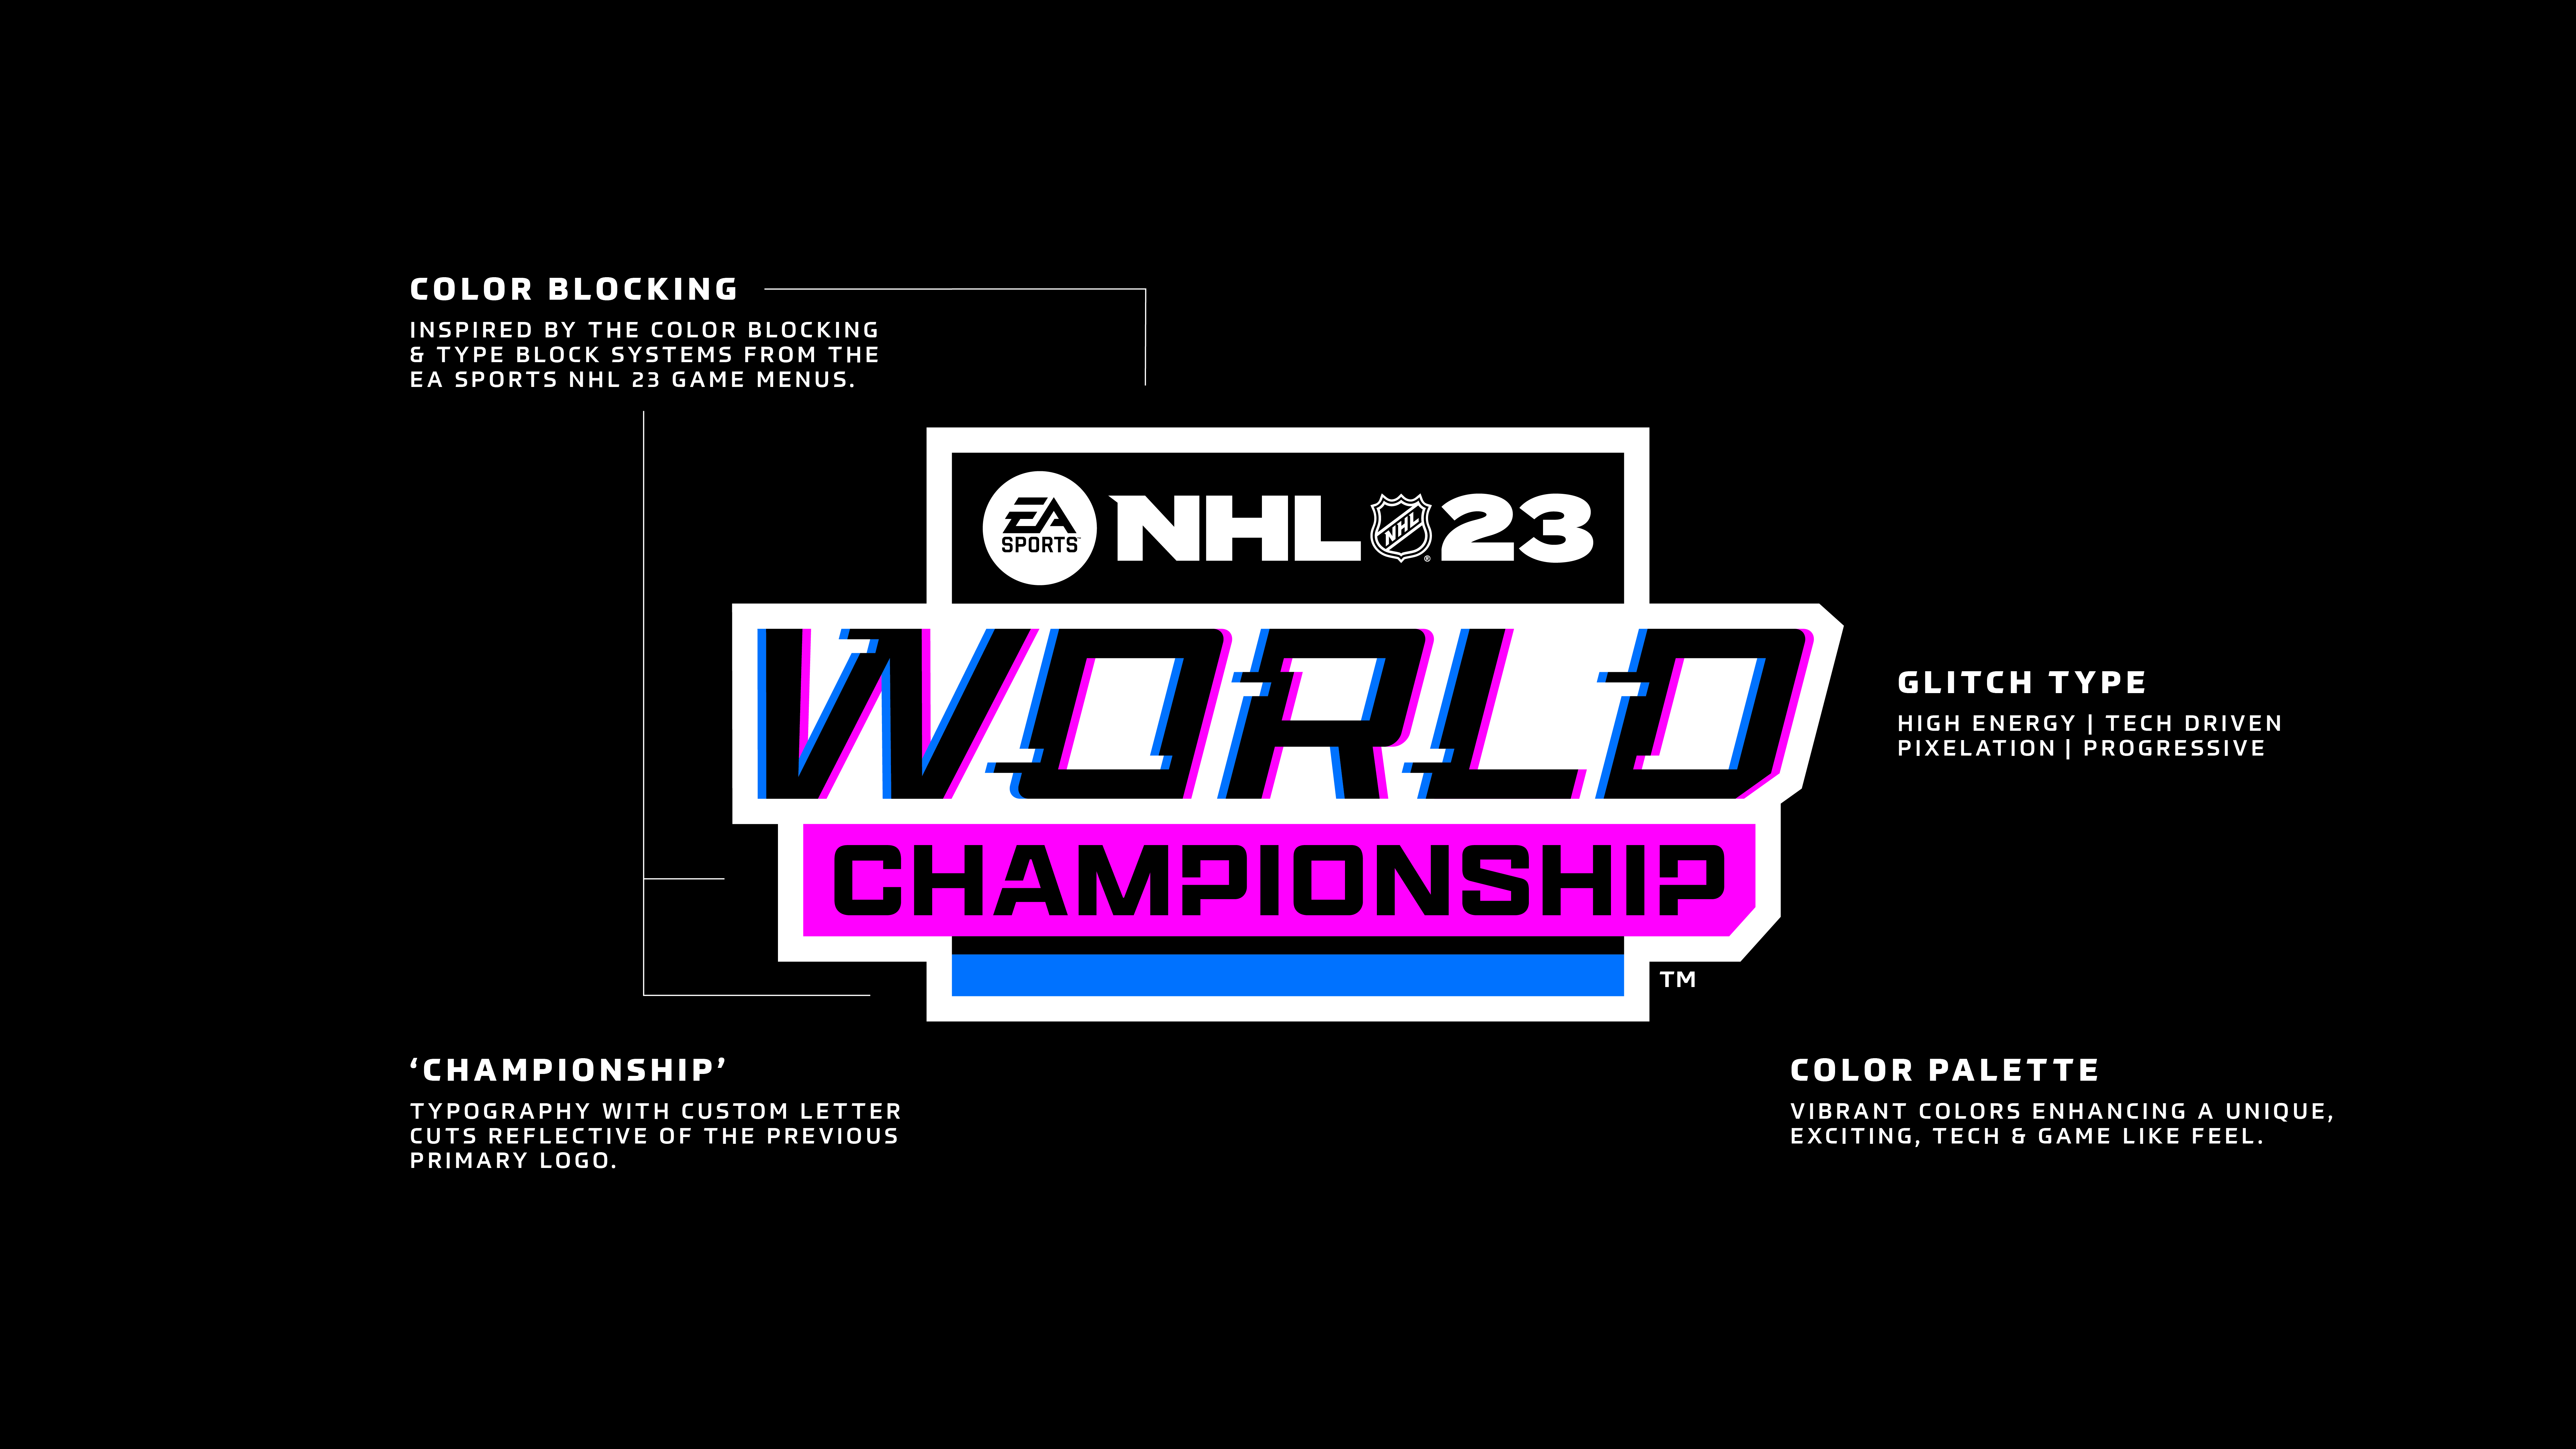 NHL.com Site Championship News - Identity Annual Expanded New Announces Esports NHL Events of - Media Brand Calendar for and